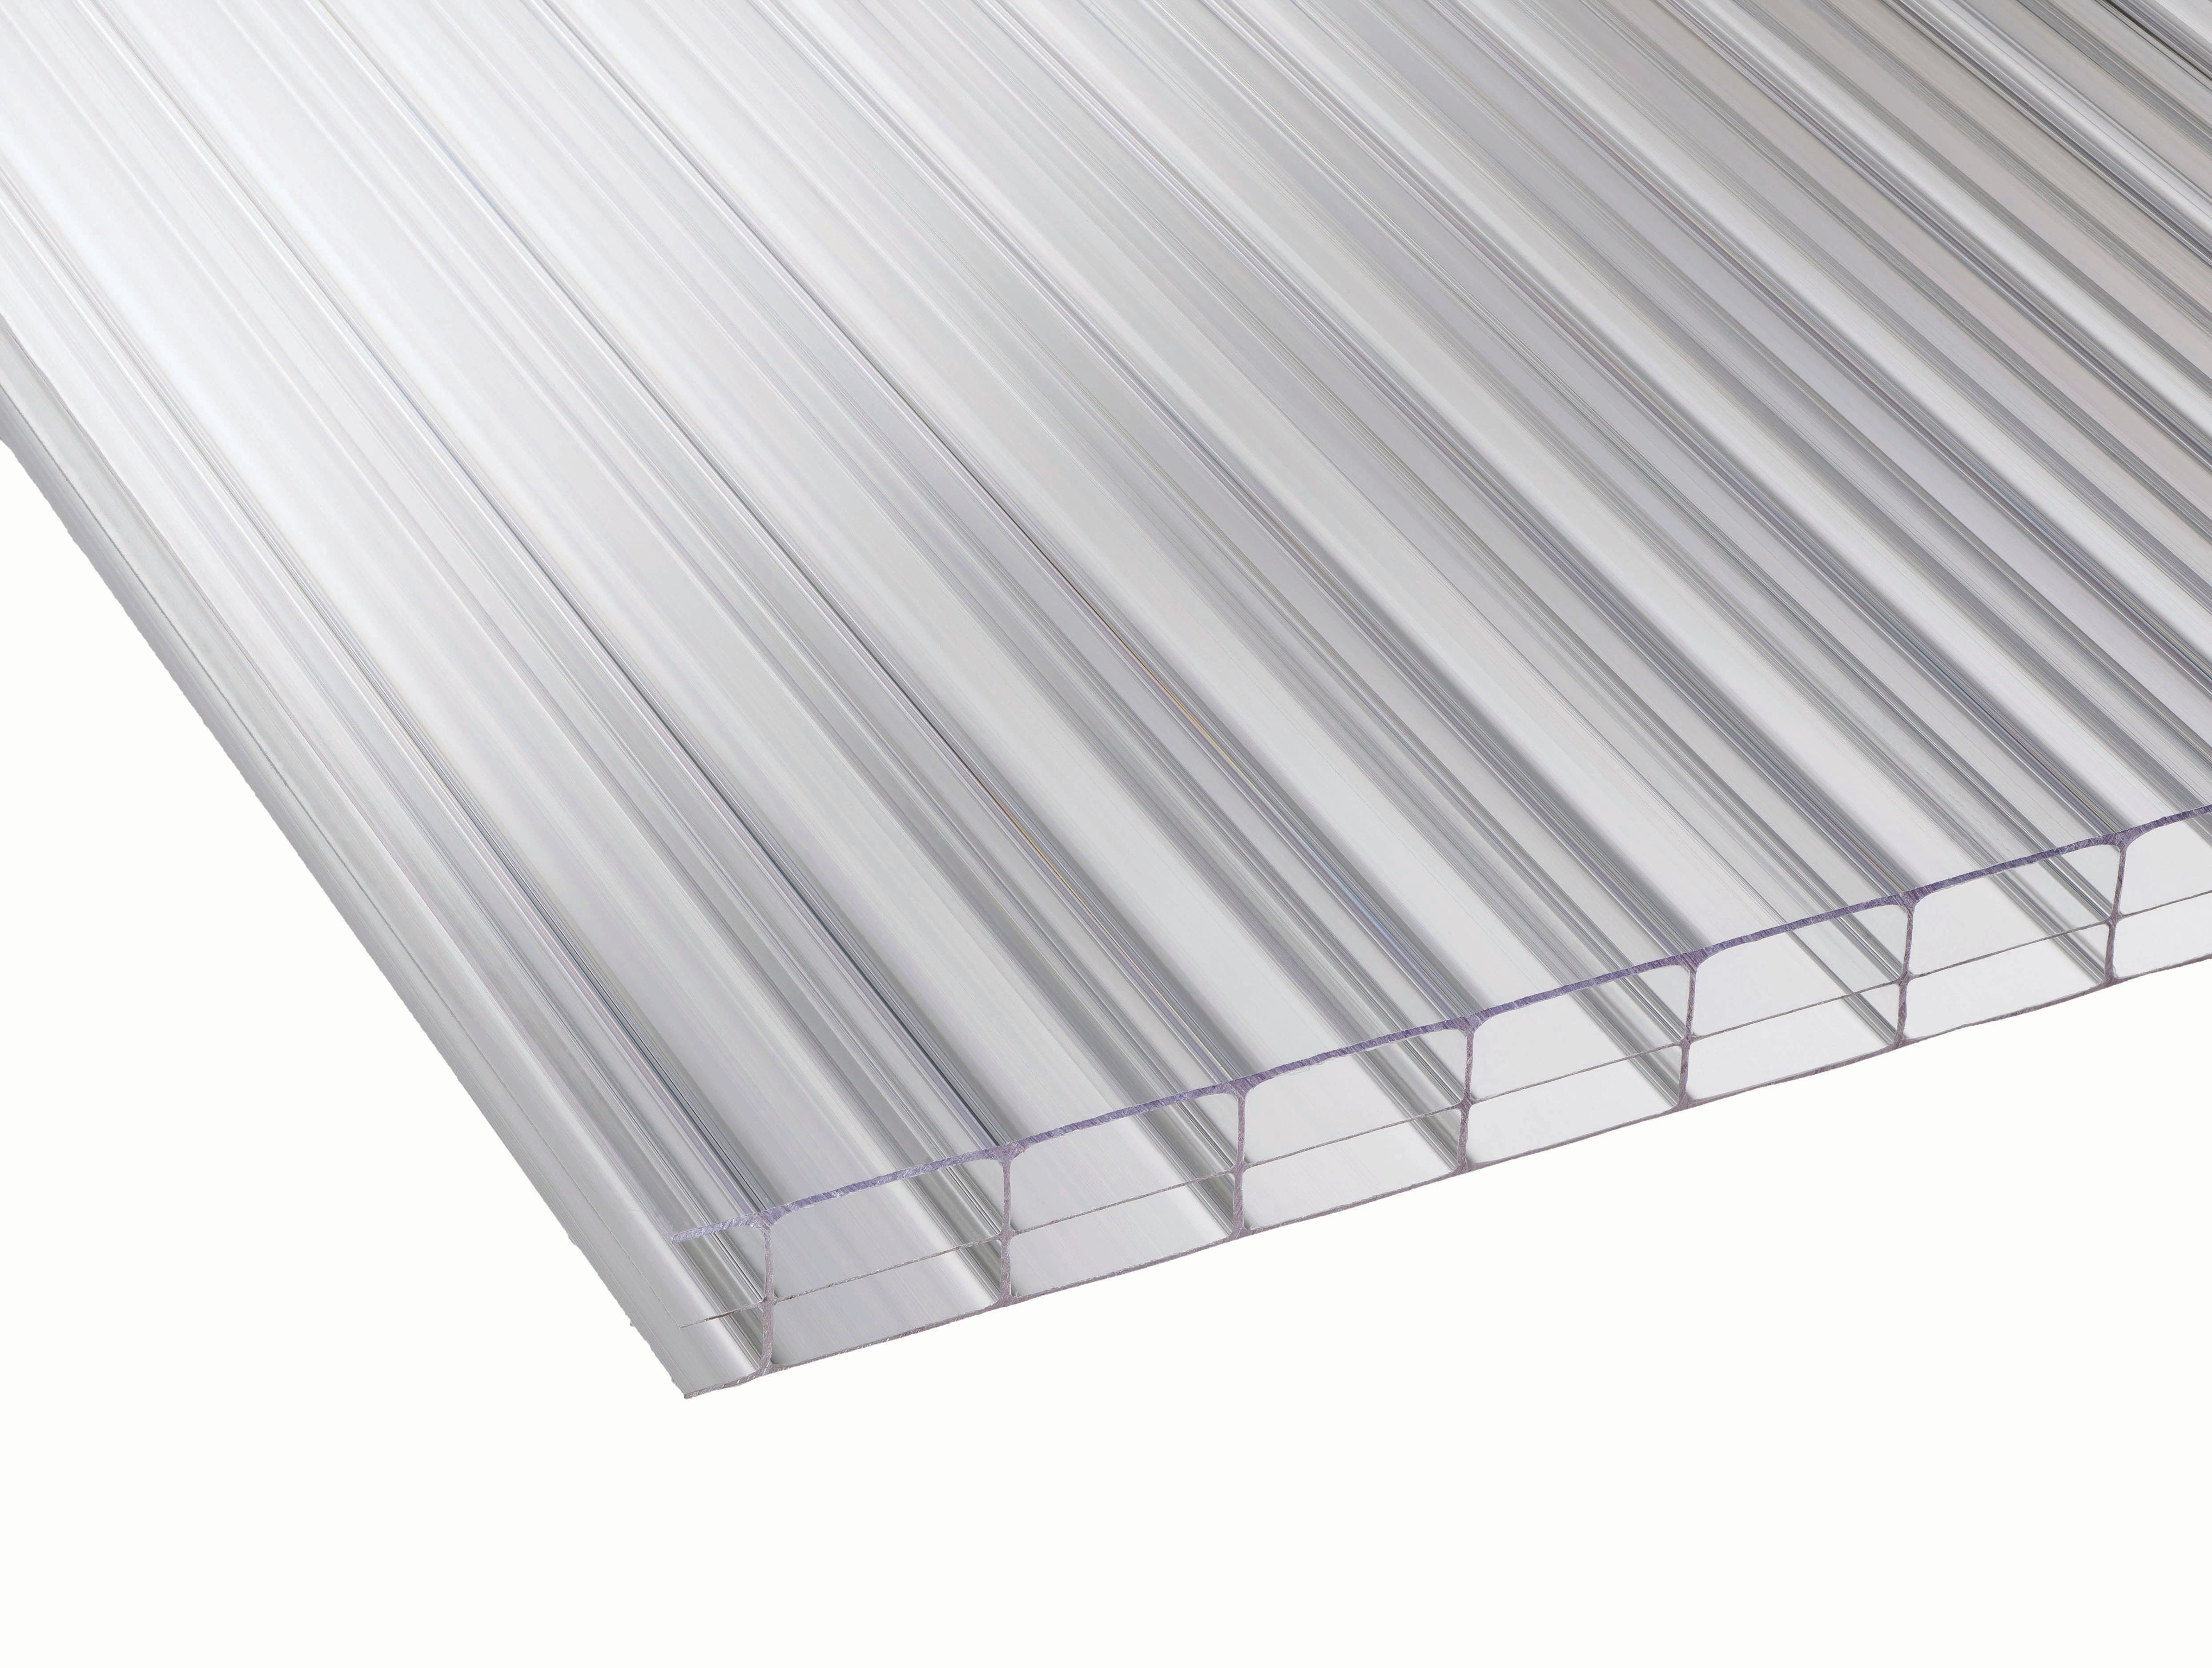 Image of 16mm Clear Multiwall Polycarbonate Sheet - 2000 x 700mm